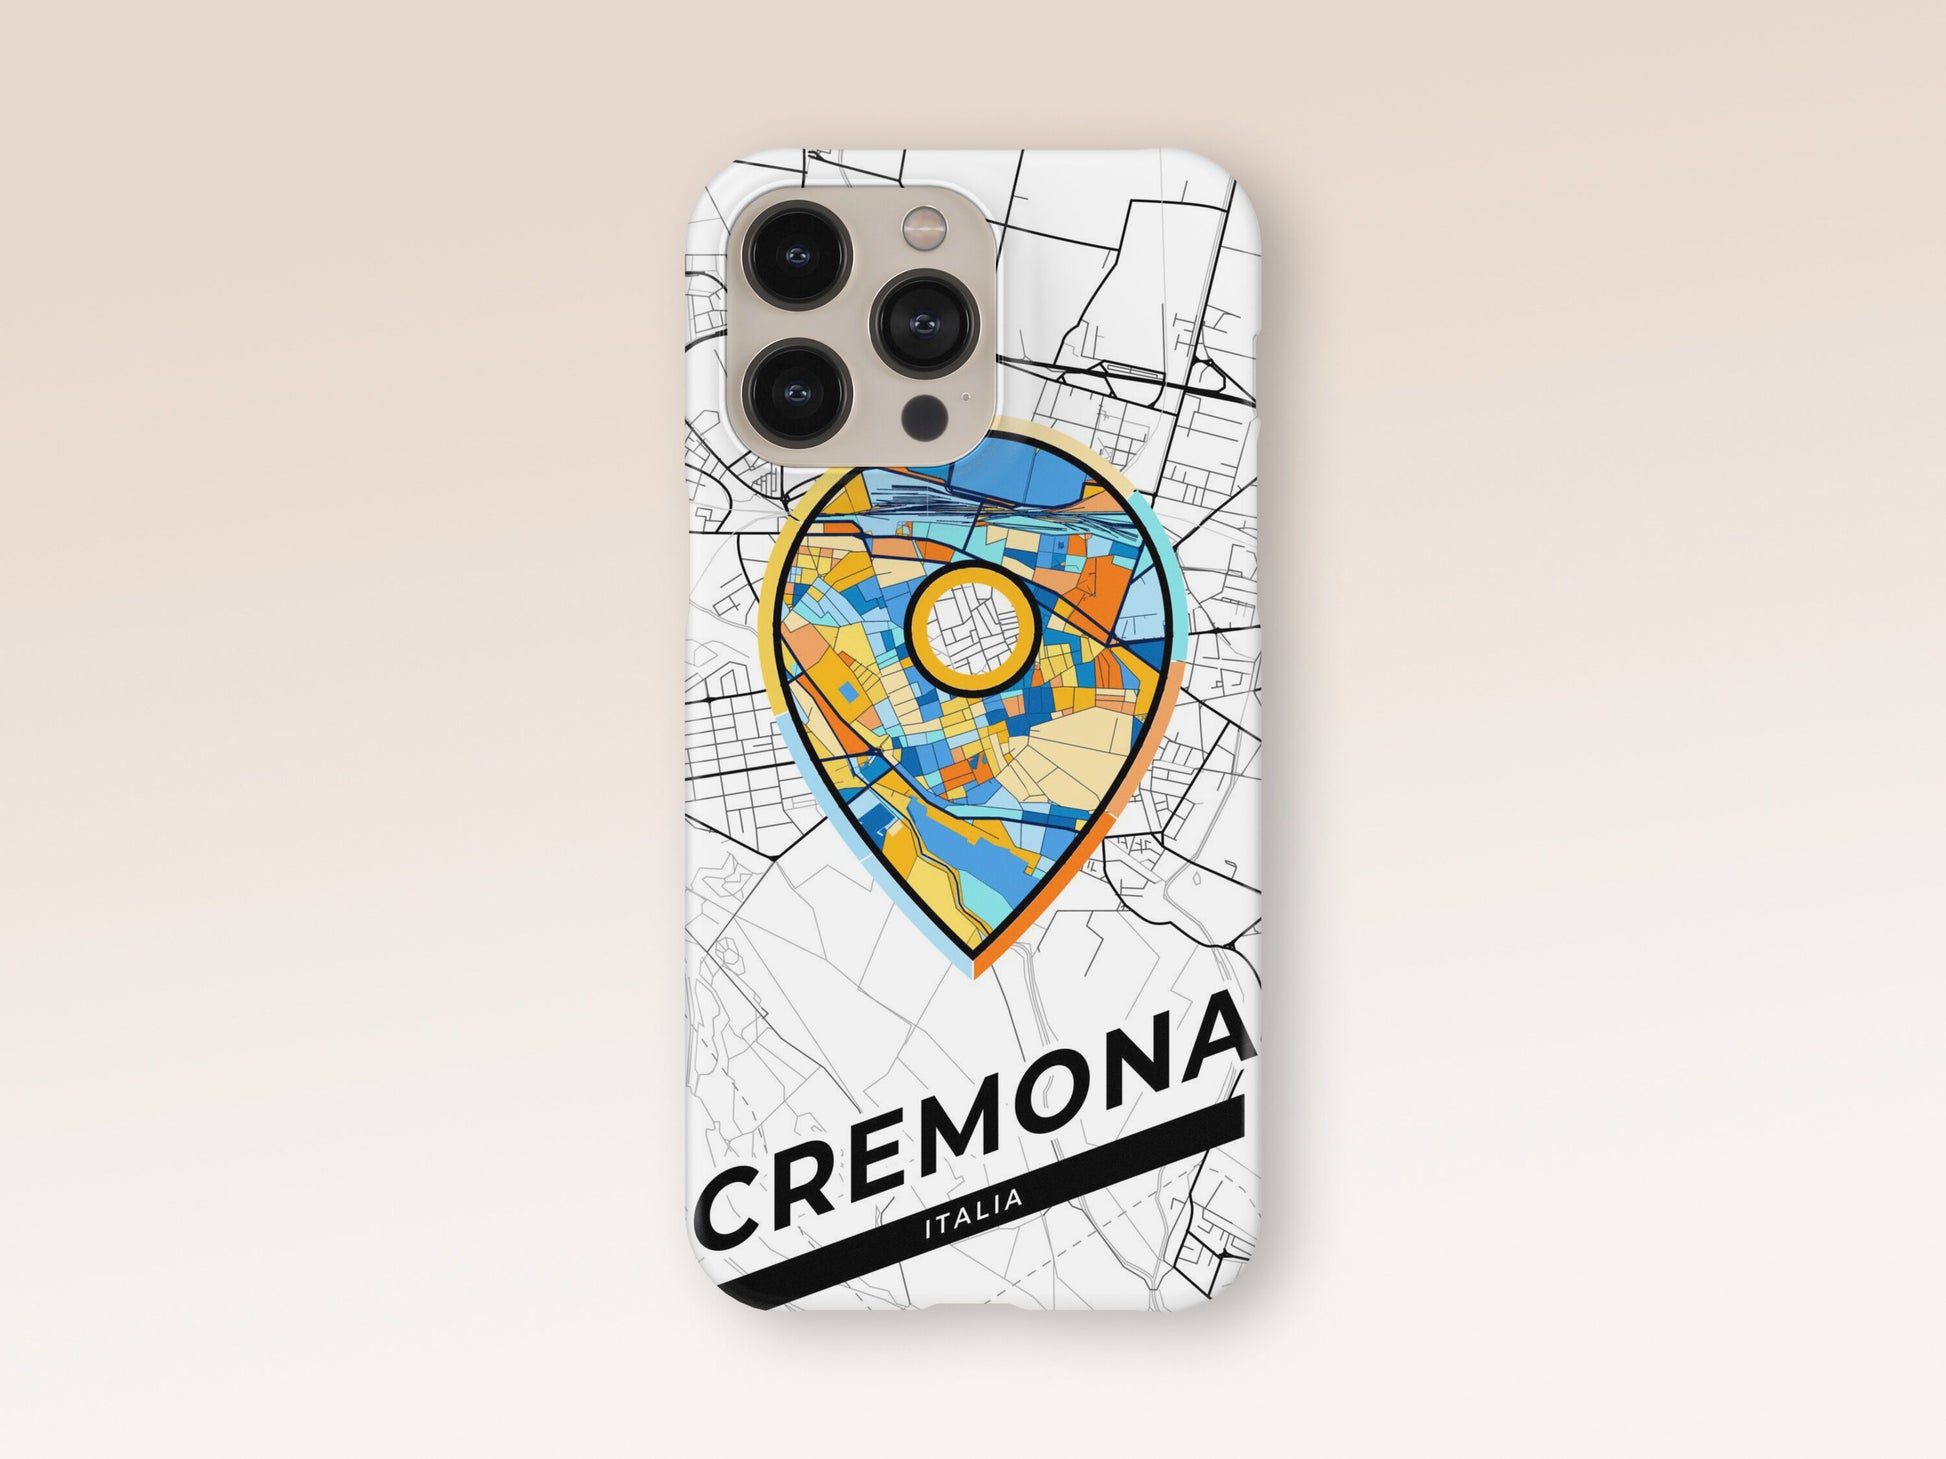 Cremona Italy slim phone case with colorful icon. Birthday, wedding or housewarming gift. Couple match cases. 1